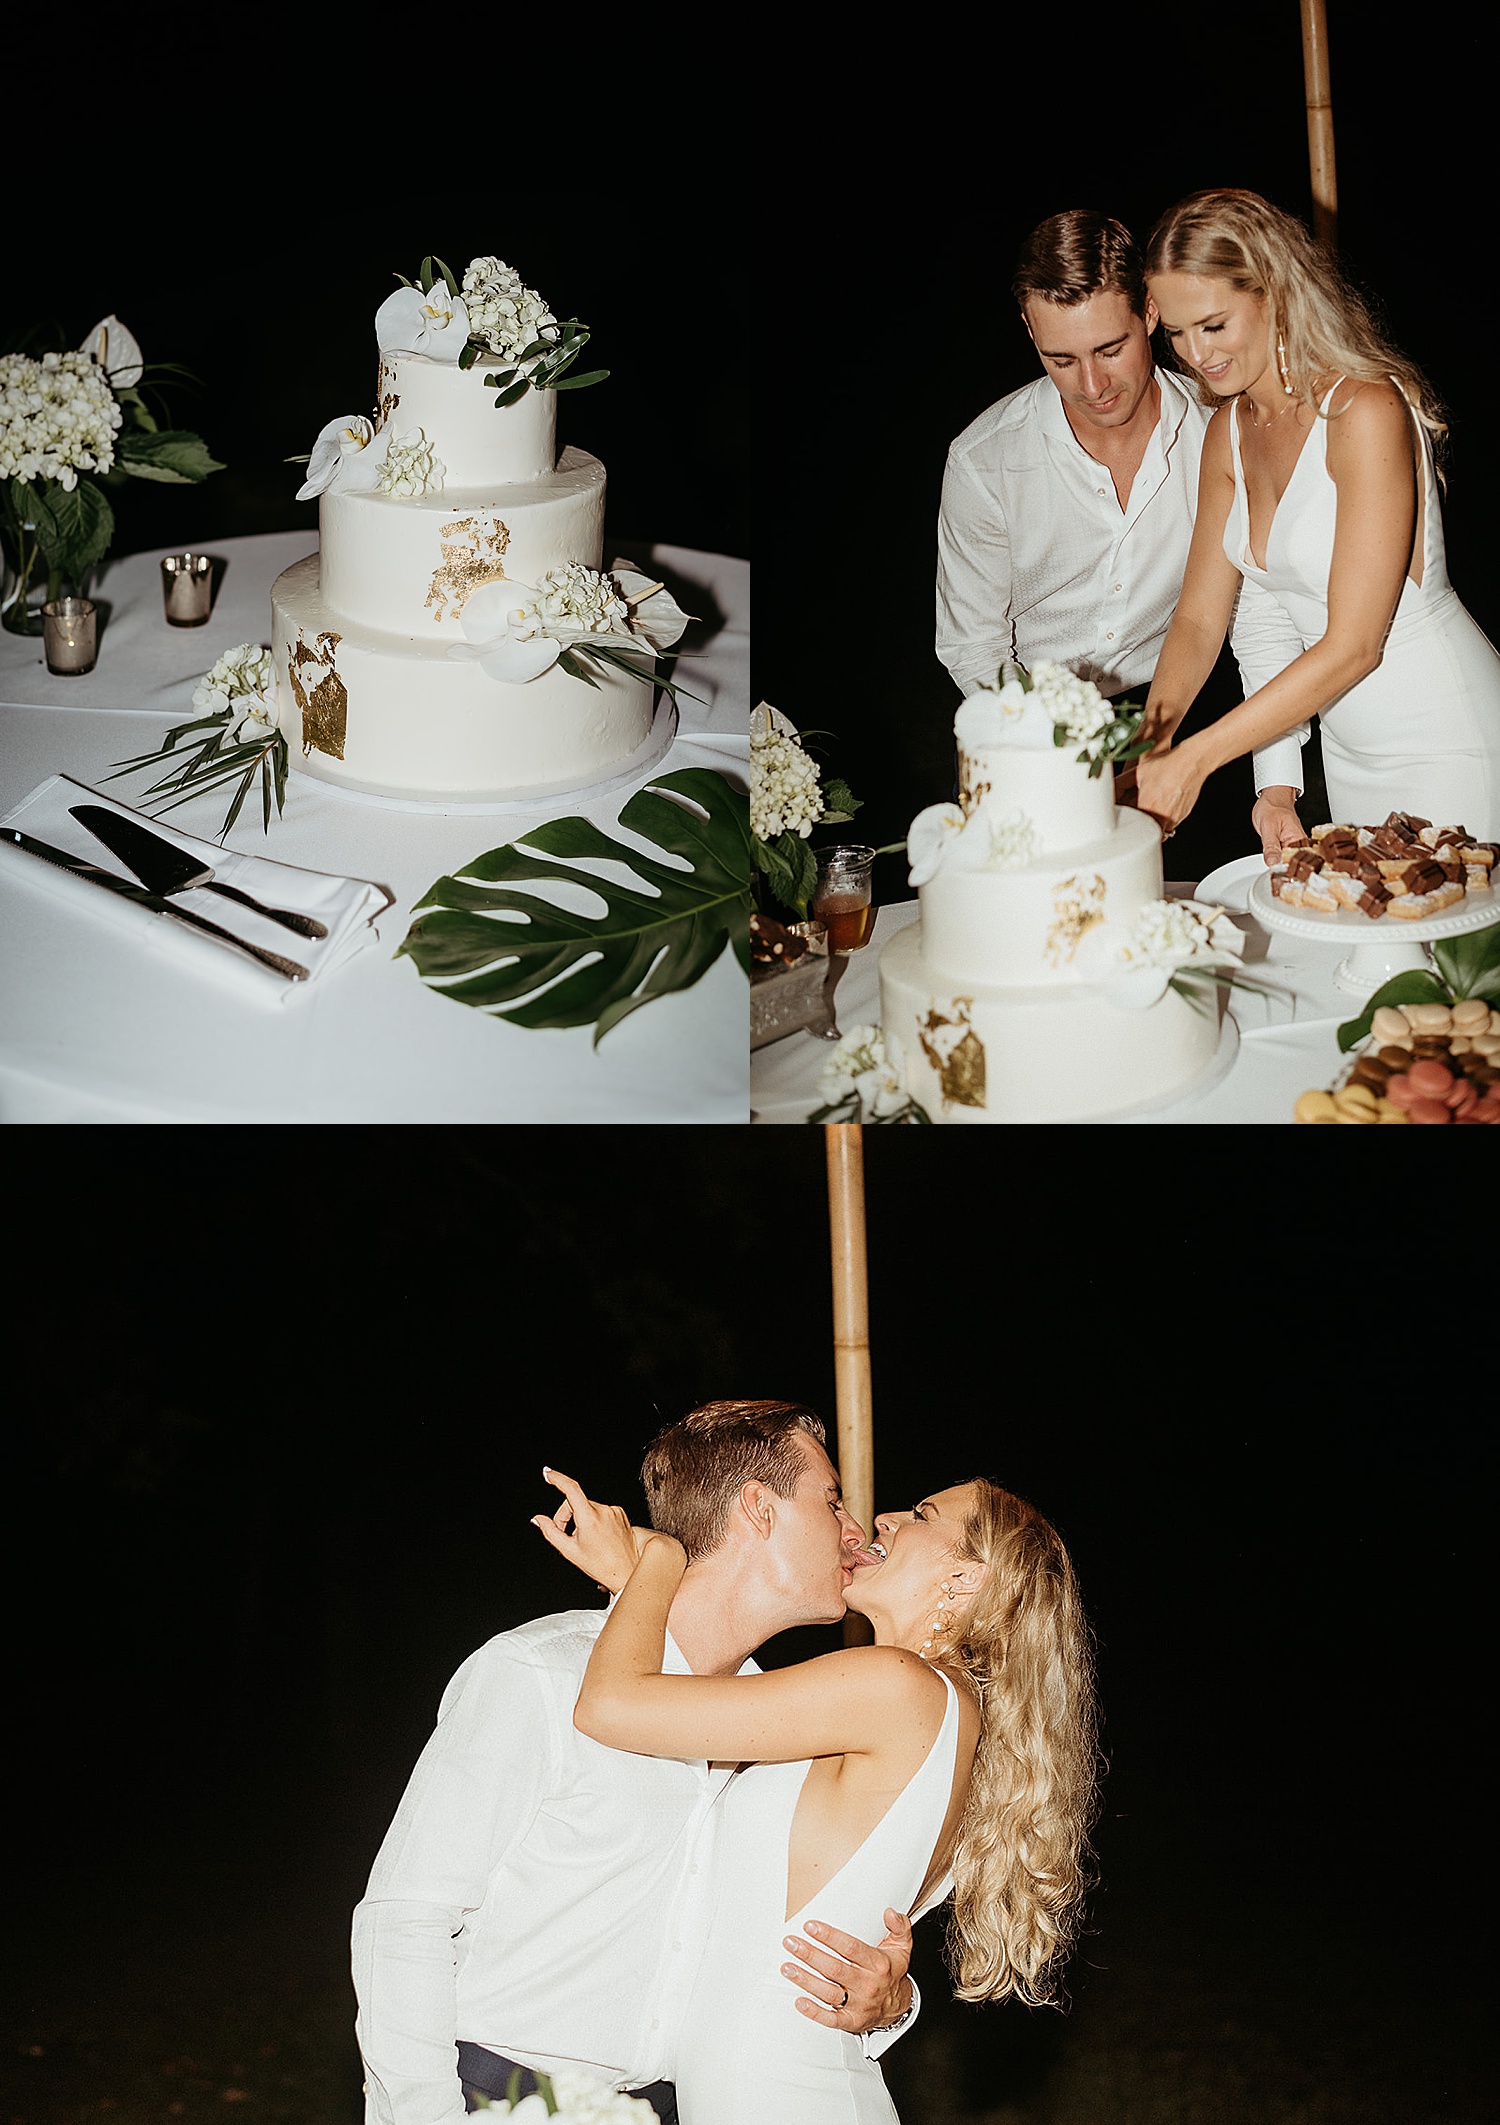 Bride and groom cut white layered cake together and share sweet kiss 